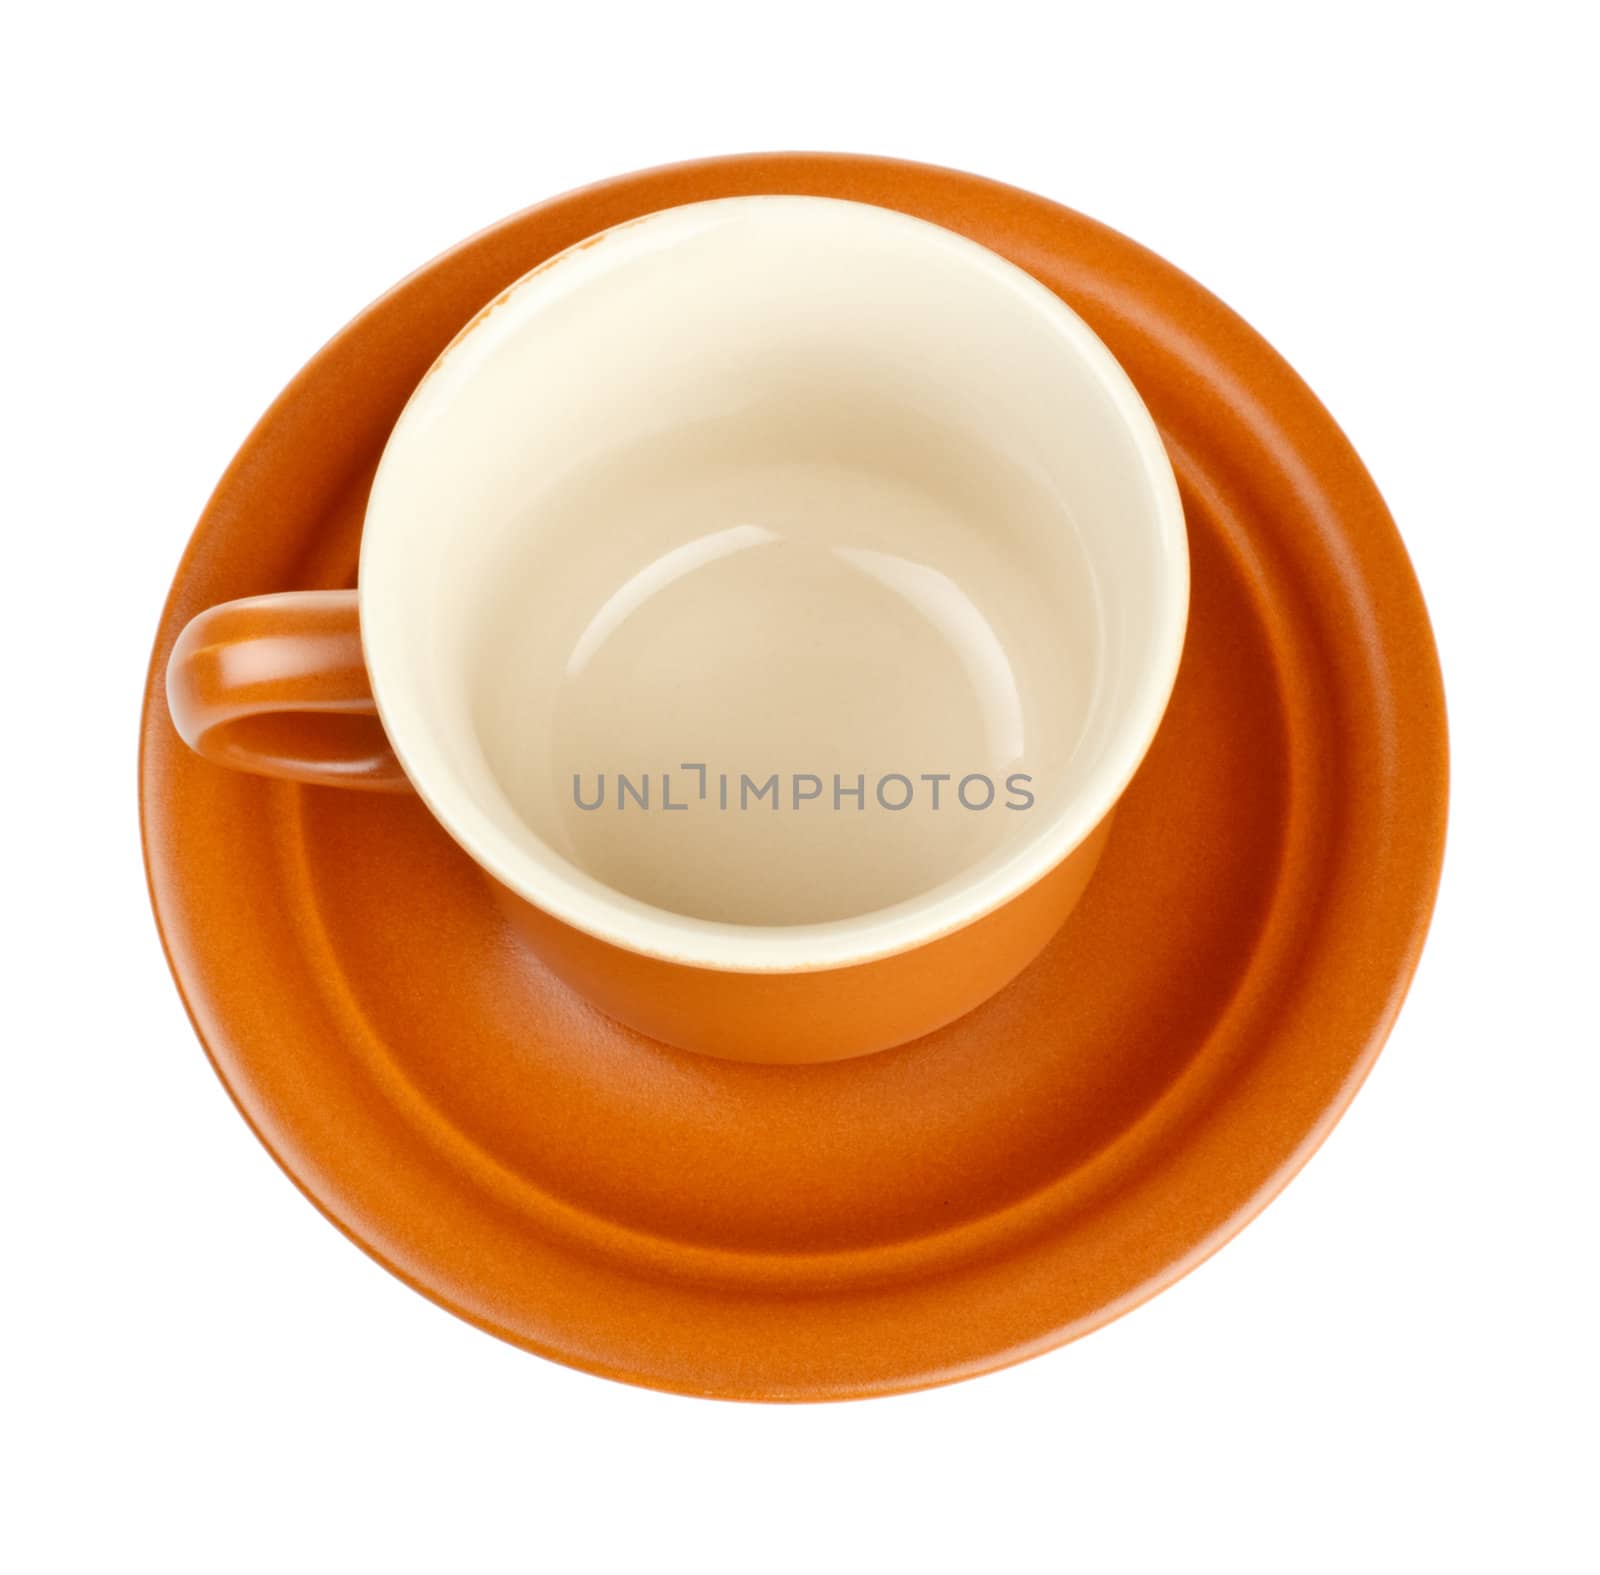 coffee cup and saucer isolated on white